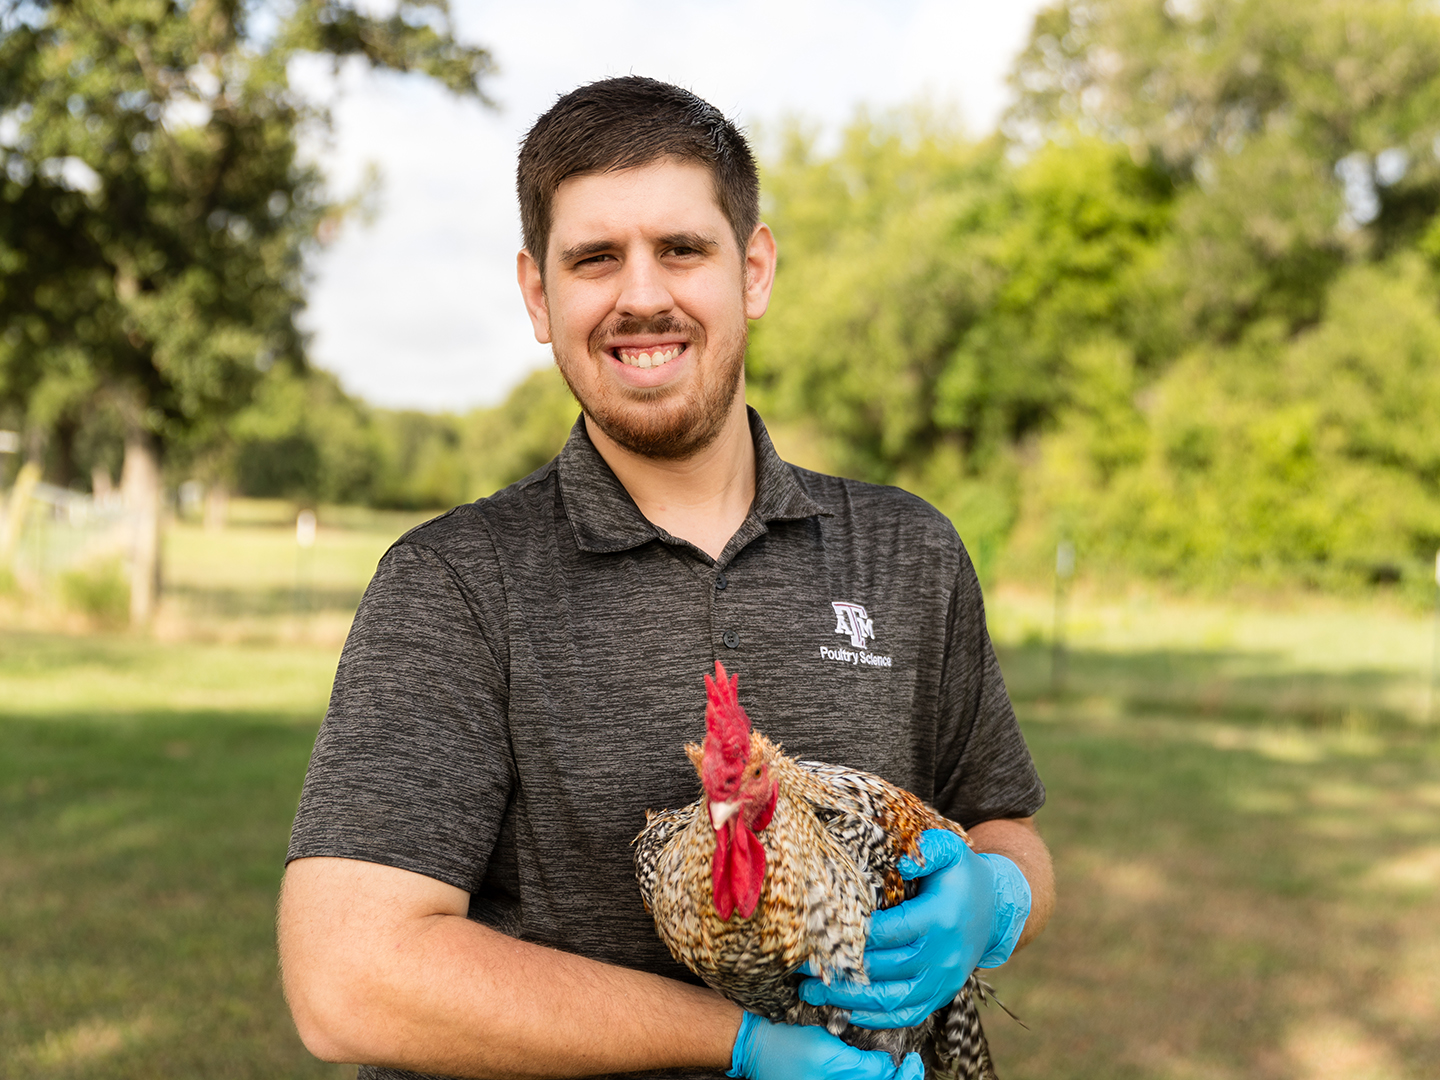 Nikolas Faust in a Texas A&M Poultry Science shirt holding a rooster